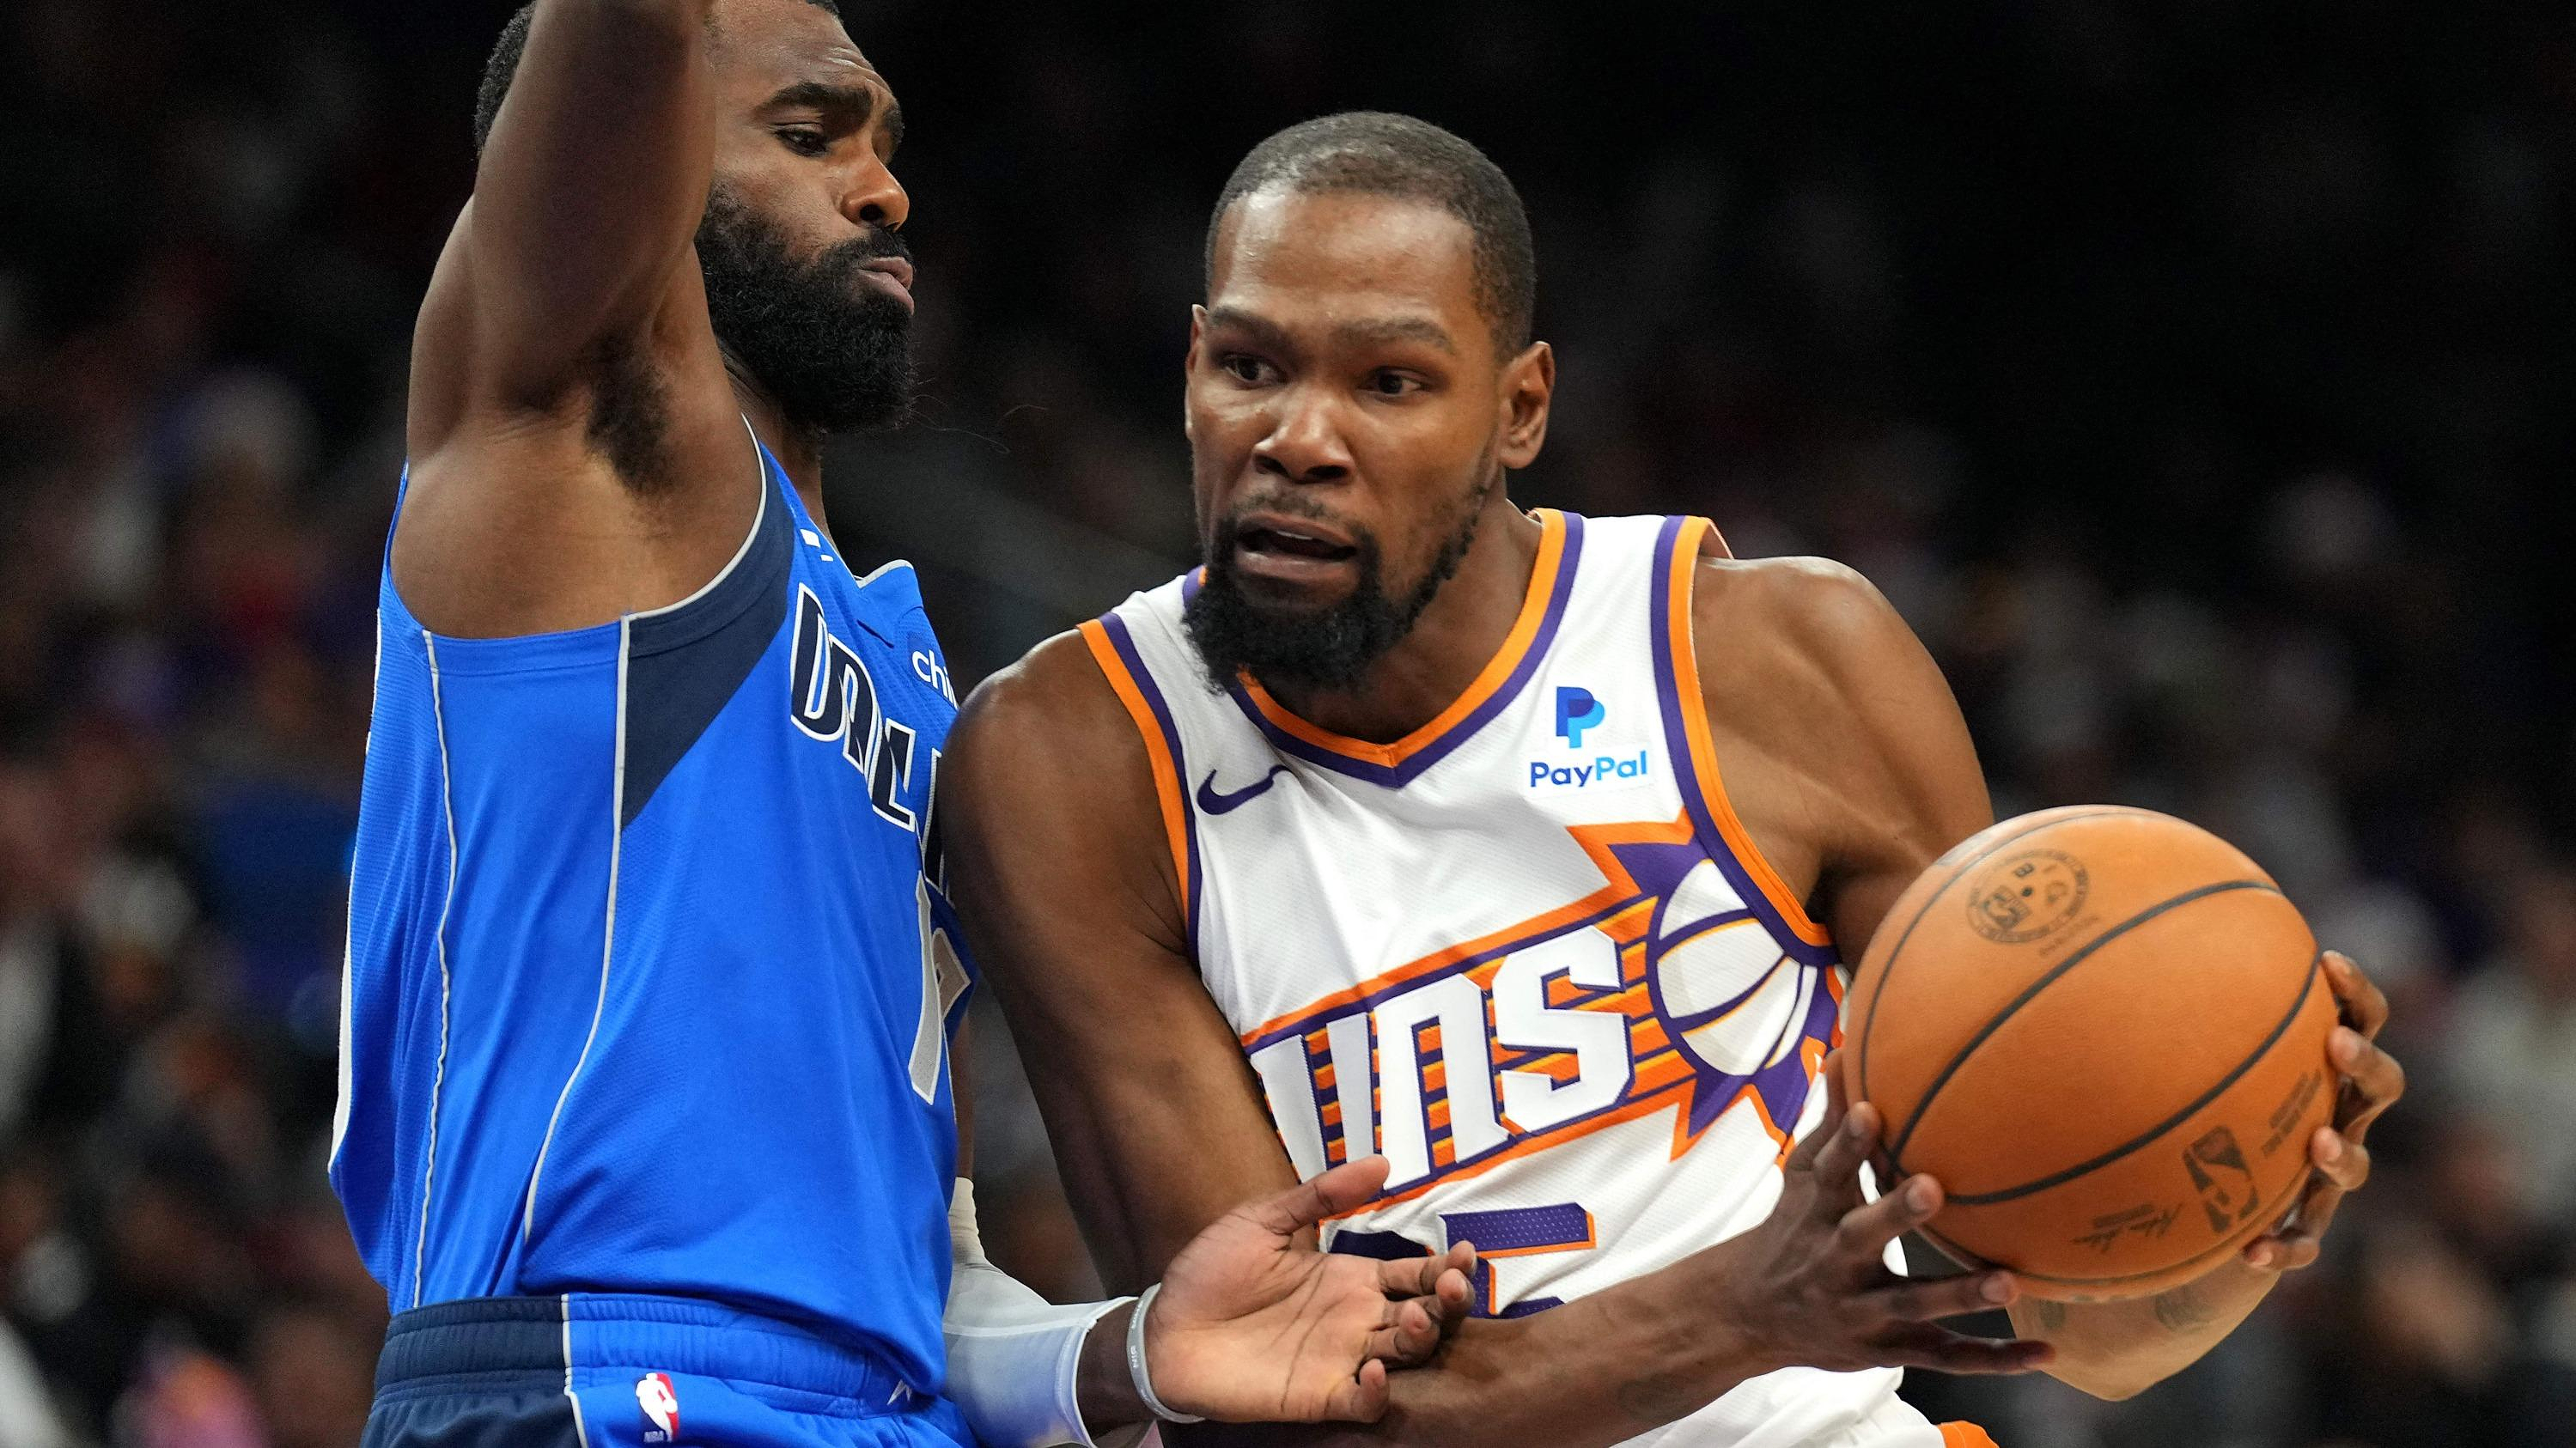 NBA: Booker and Durant frustrated, things are tense at the Phoenix Suns